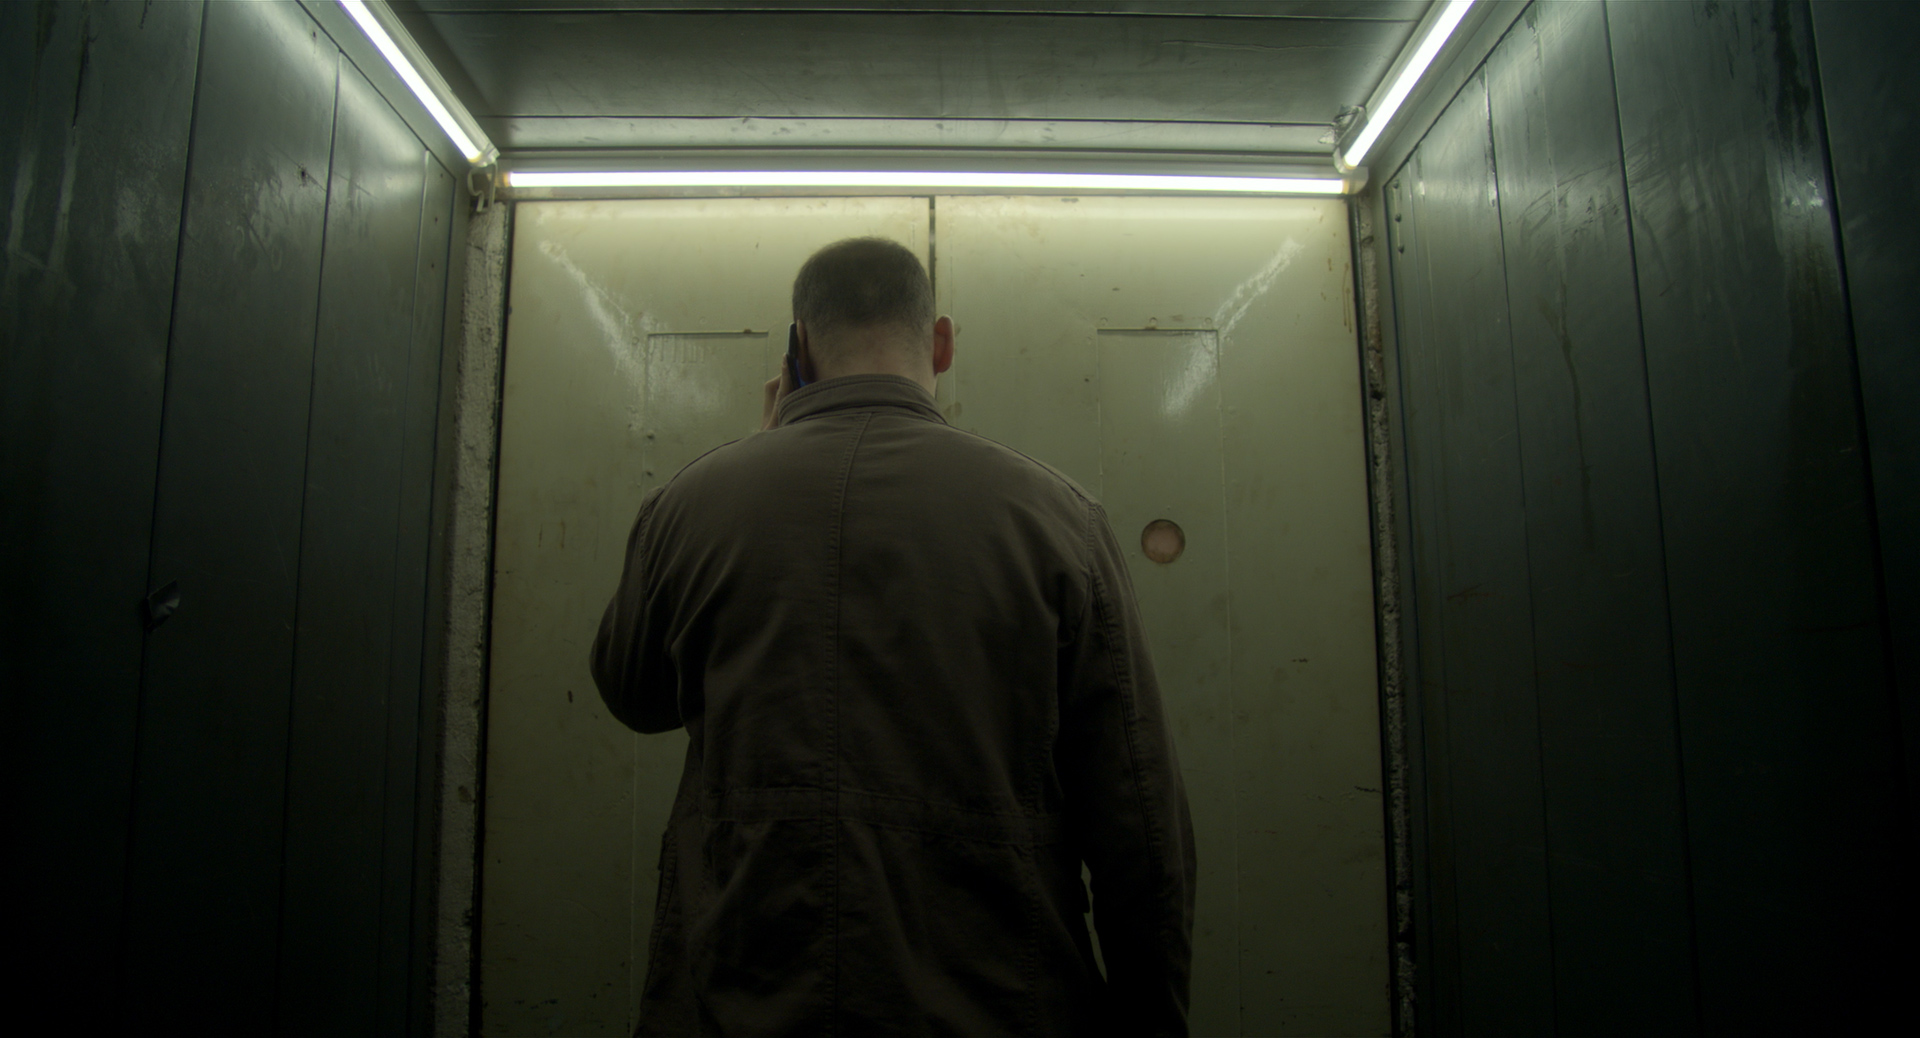 eszter galambos, Still from the short Tiger. Director of Photography, DOP, Cinematographer, operatőr: Eszter Galambos. Director: Péter Hajmási. Colorist: Anna Stalter, Cast: Milán SchruffIndustrial dirty, moody elevator. Somebody is talking on the phone. Green. Cinematographer: Galambos Eszter. Diector: Péter Hajmási